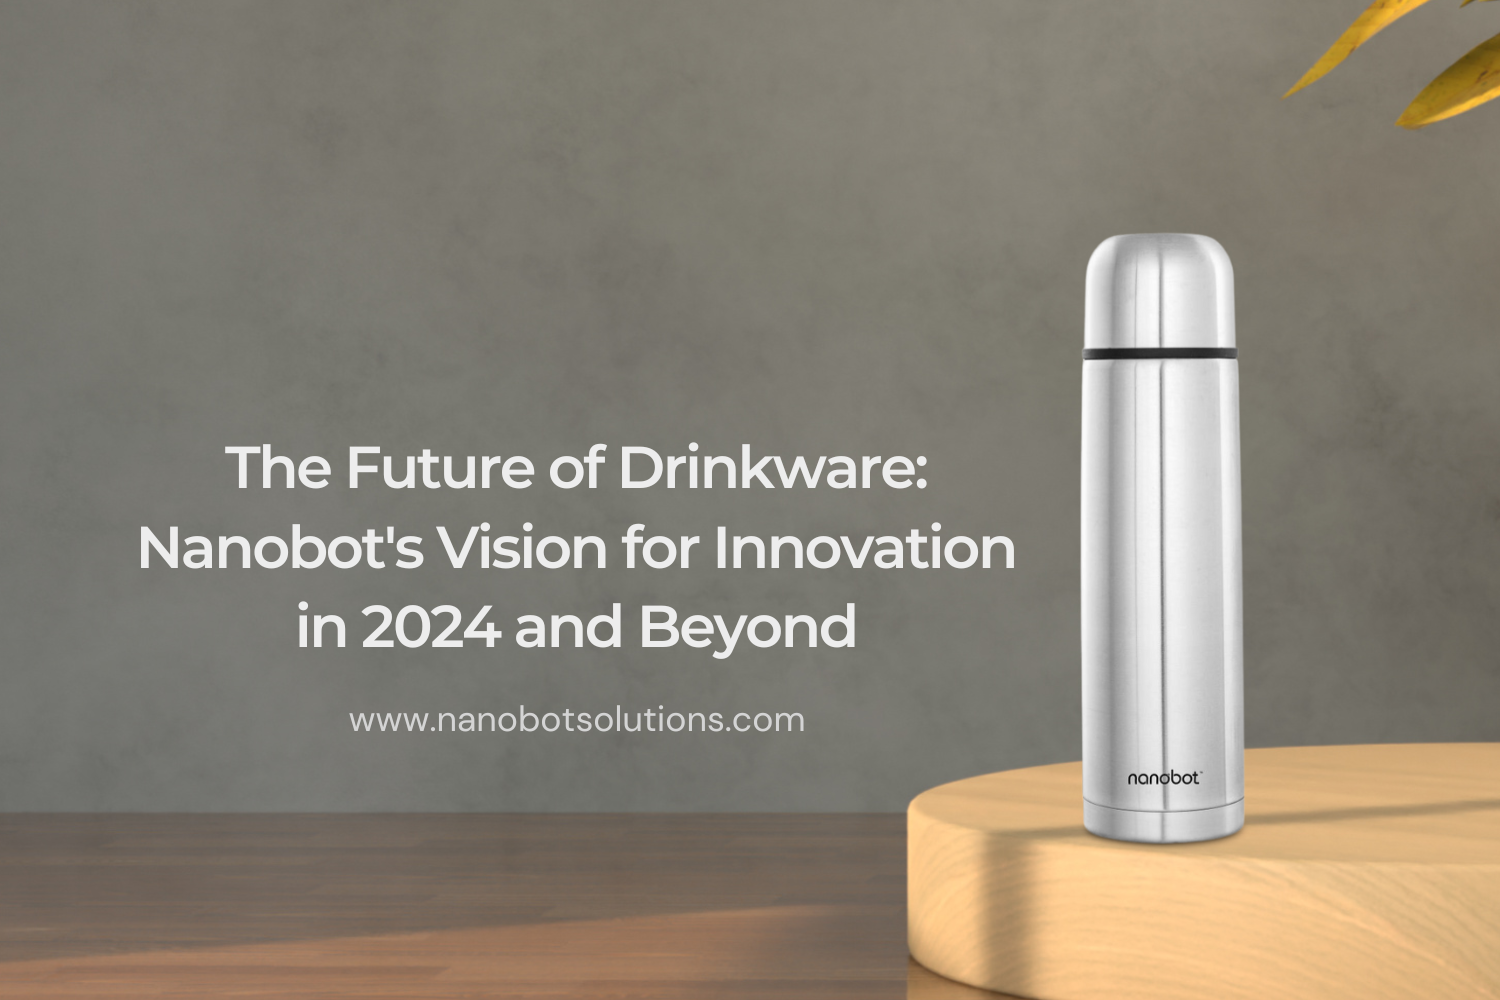 The Future of Drinkware Nanobots Vision for Innovation in 2024 and Beyond | Nanobot